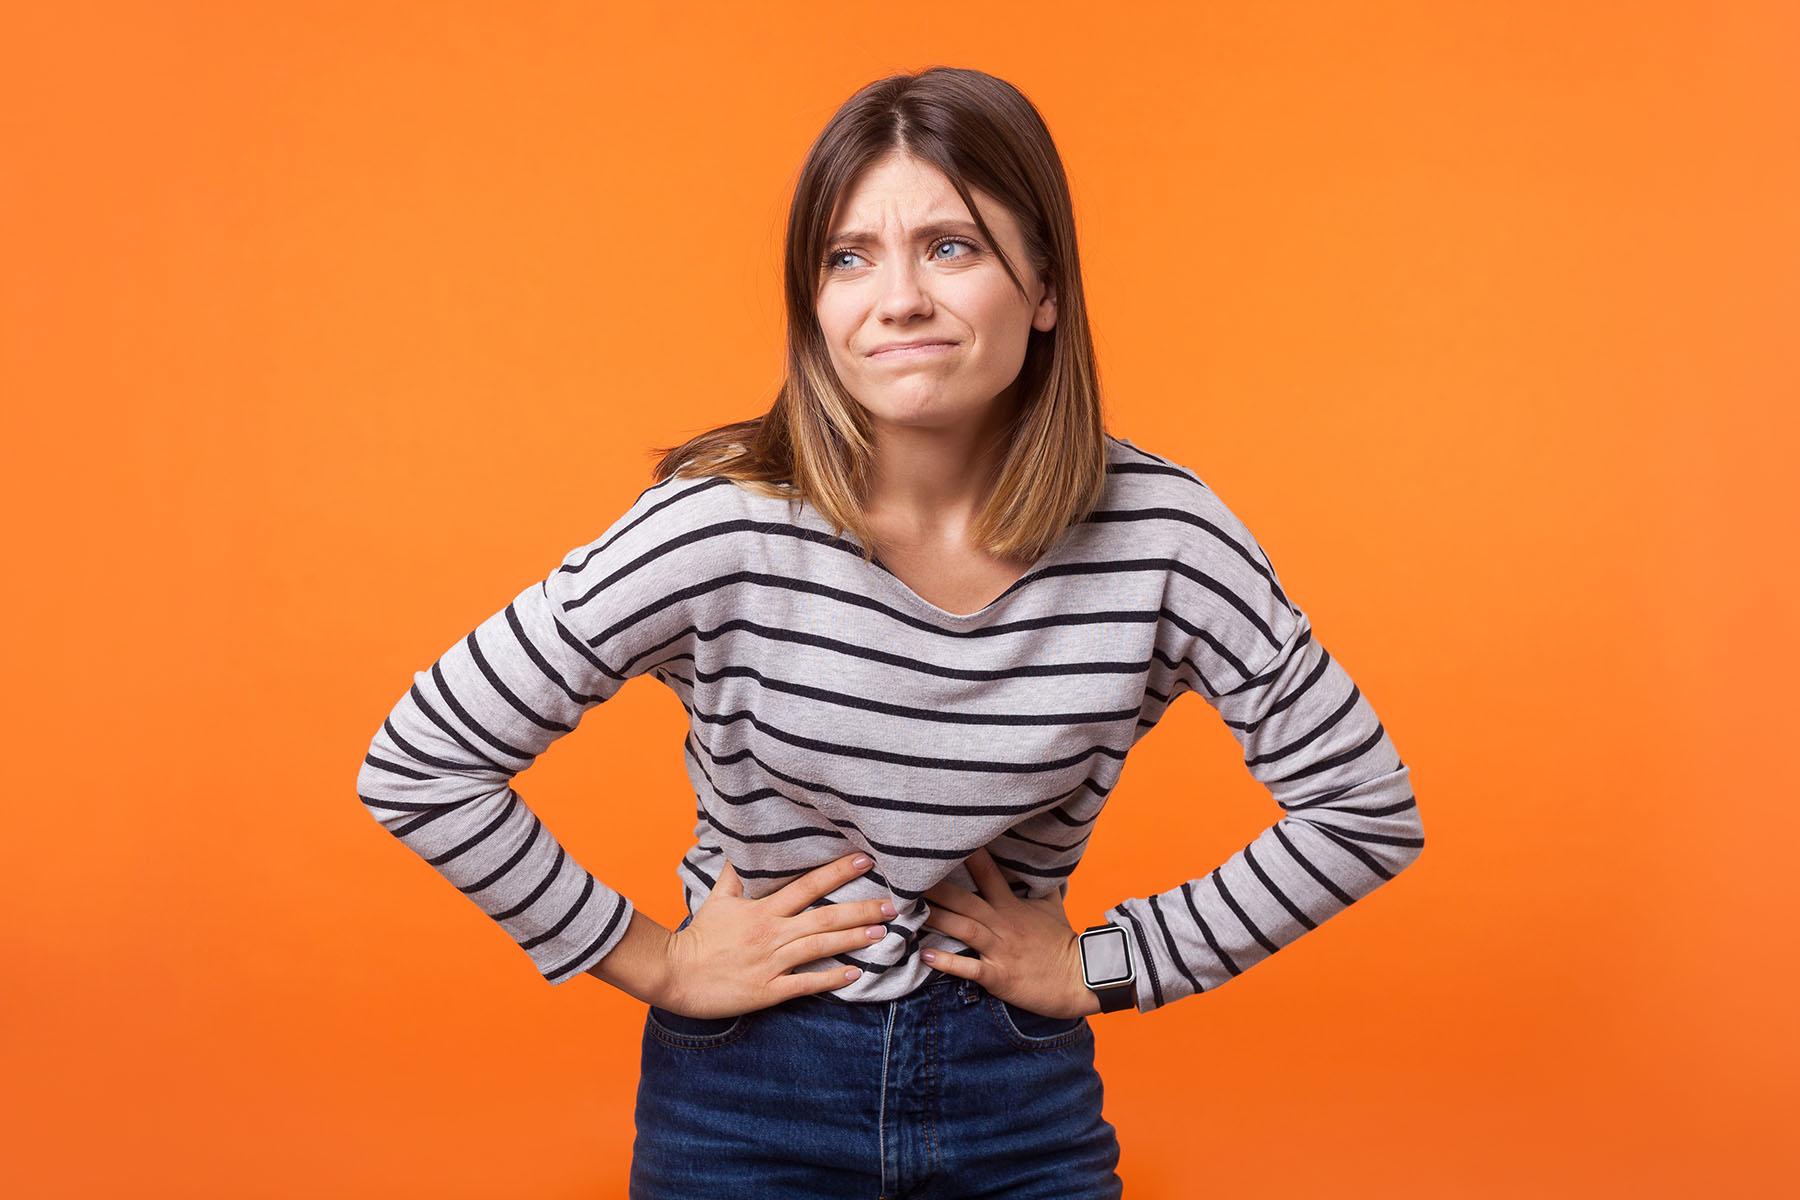 Young woman in striped shirt against orange background holds stomach due to bloating.